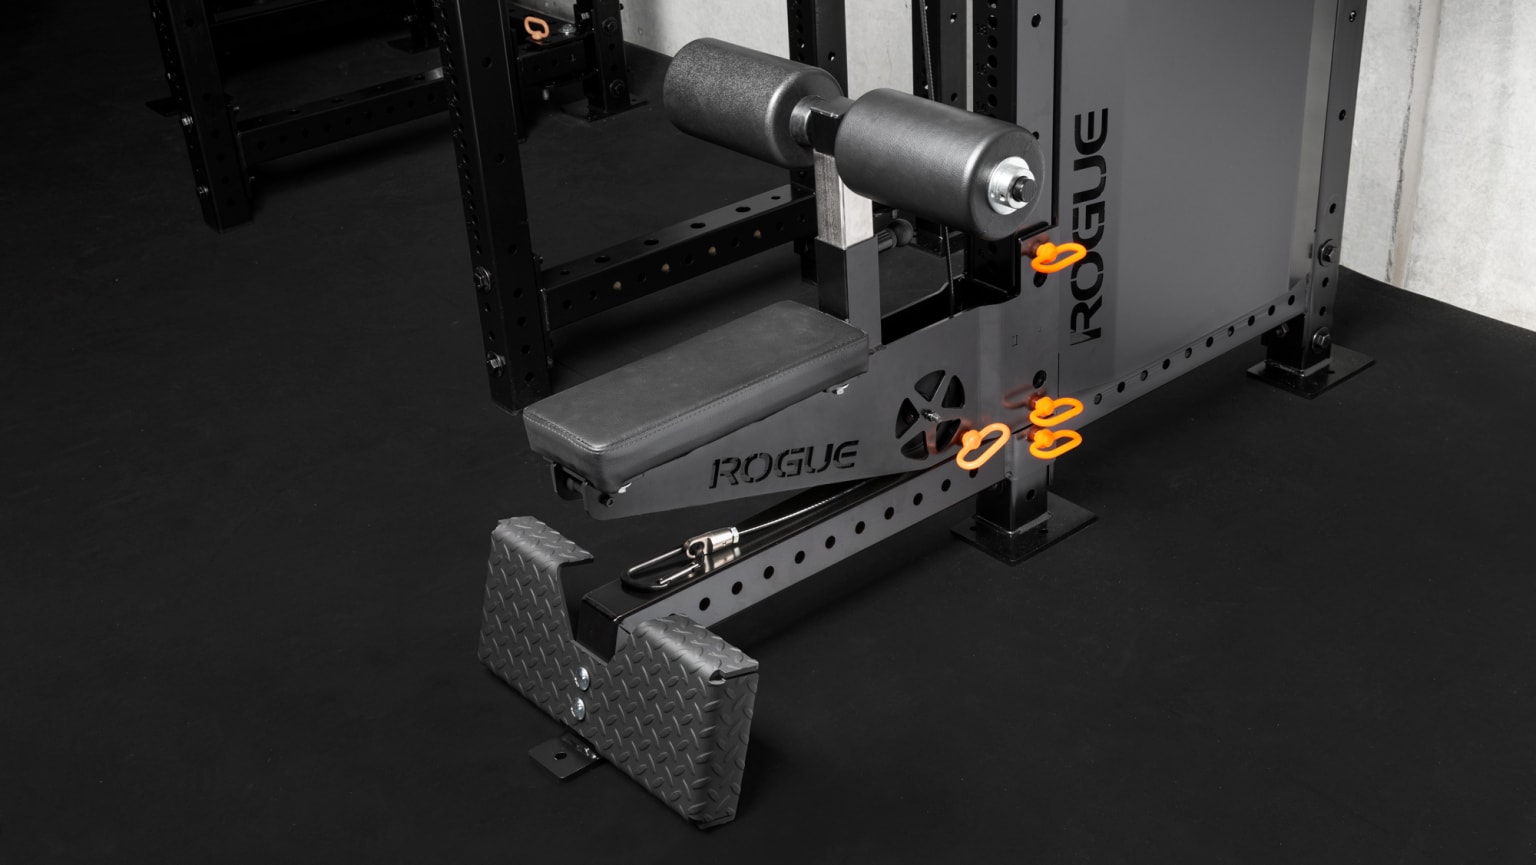 Monster Lite Rack Mount Lat Pulldown Seat | Rogue Fitness Canada